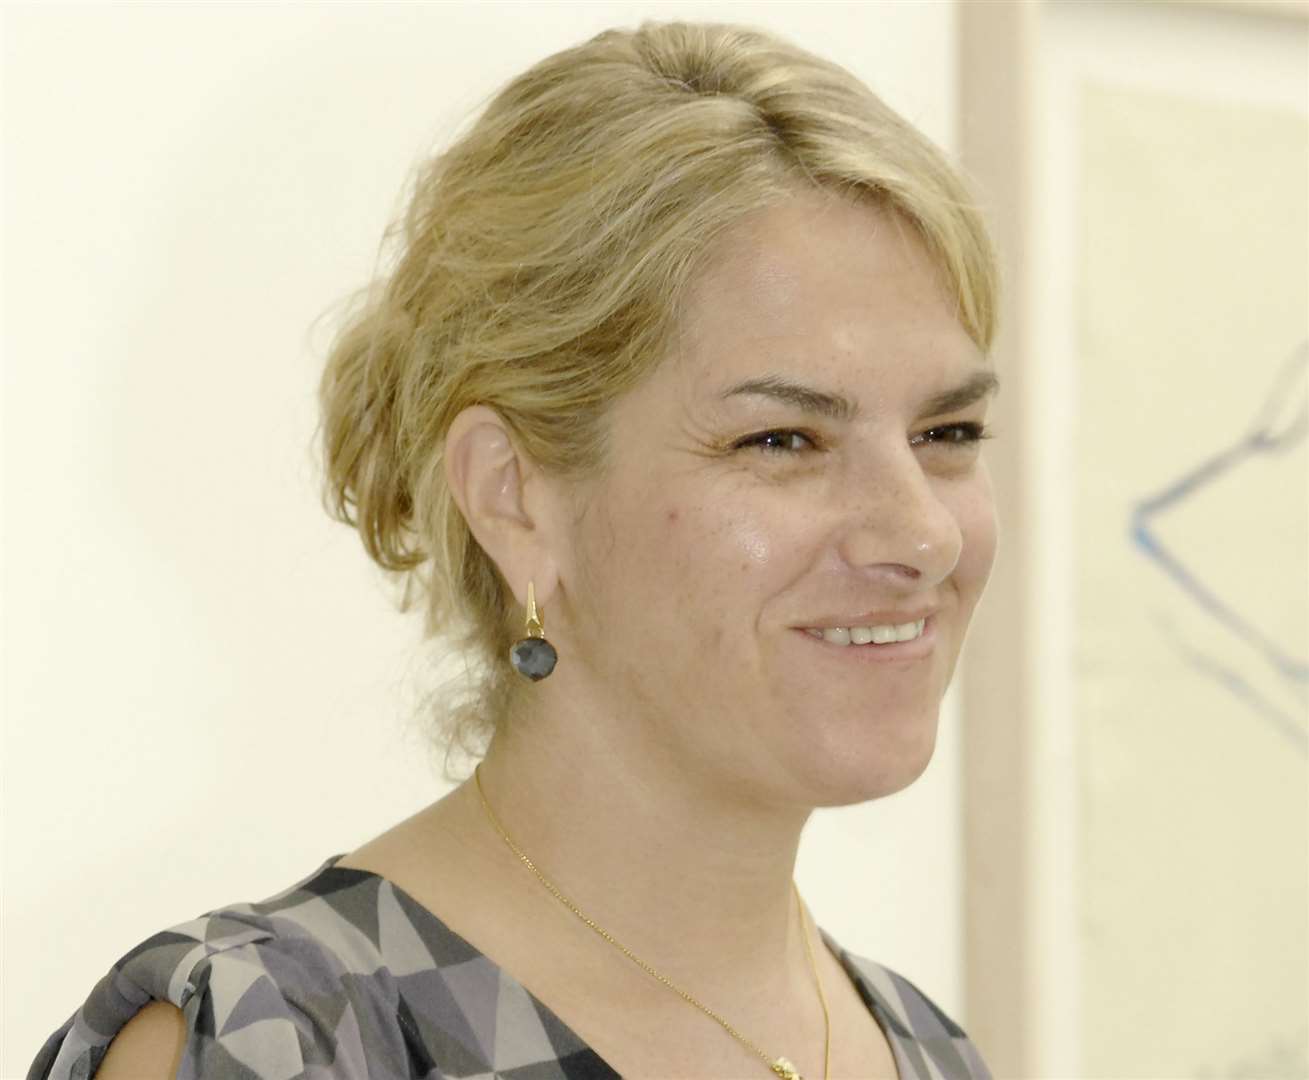 Tracey Emin gave her backing to Turner prize coming to Margate